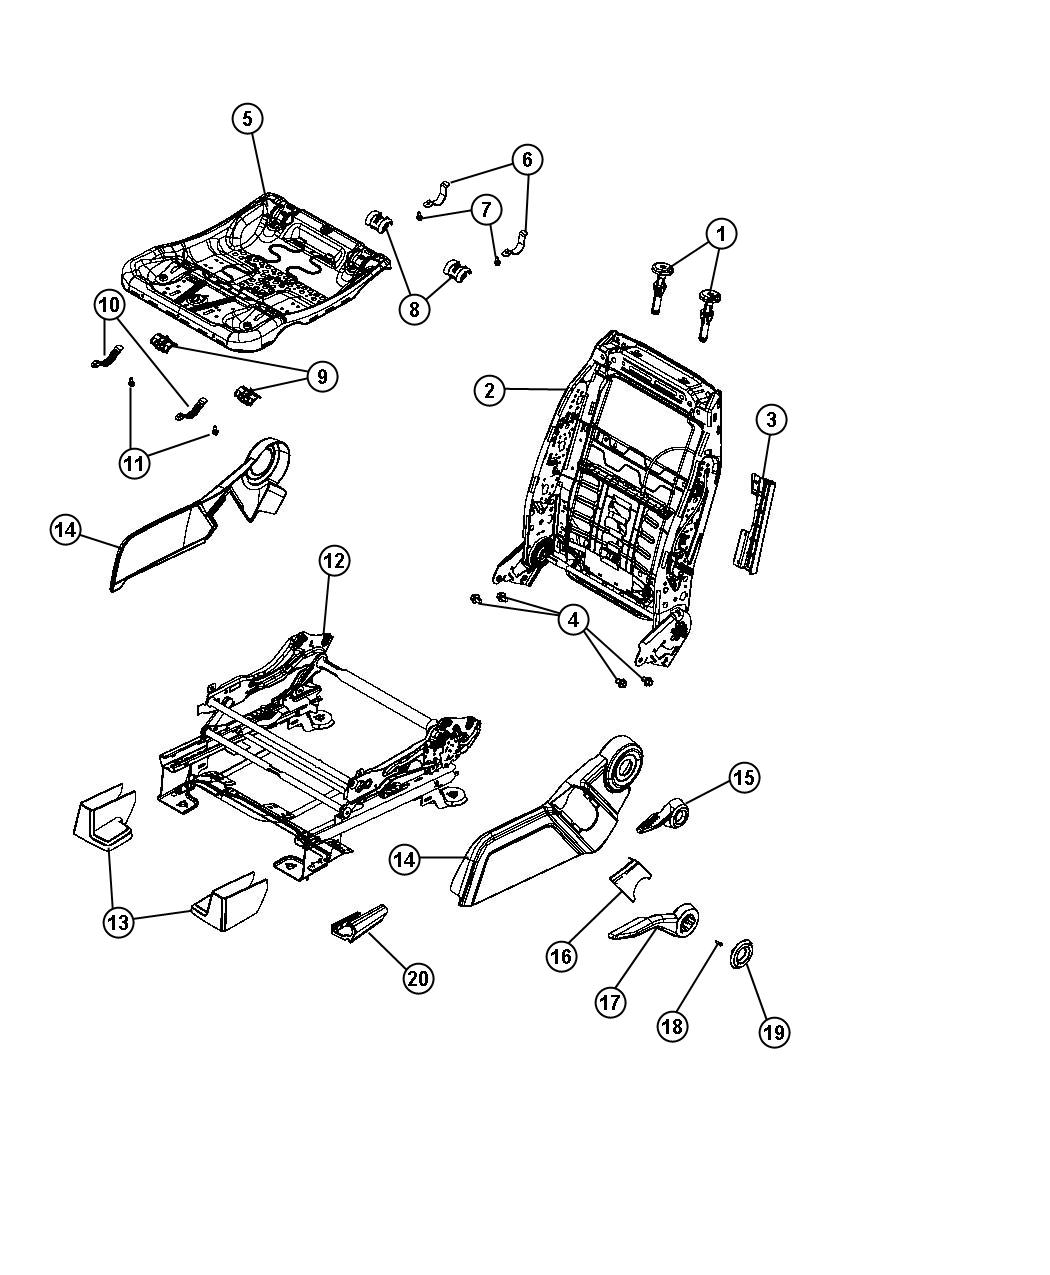 Adjusters, Recliners and Shields - Driver Seat - Manual. Diagram